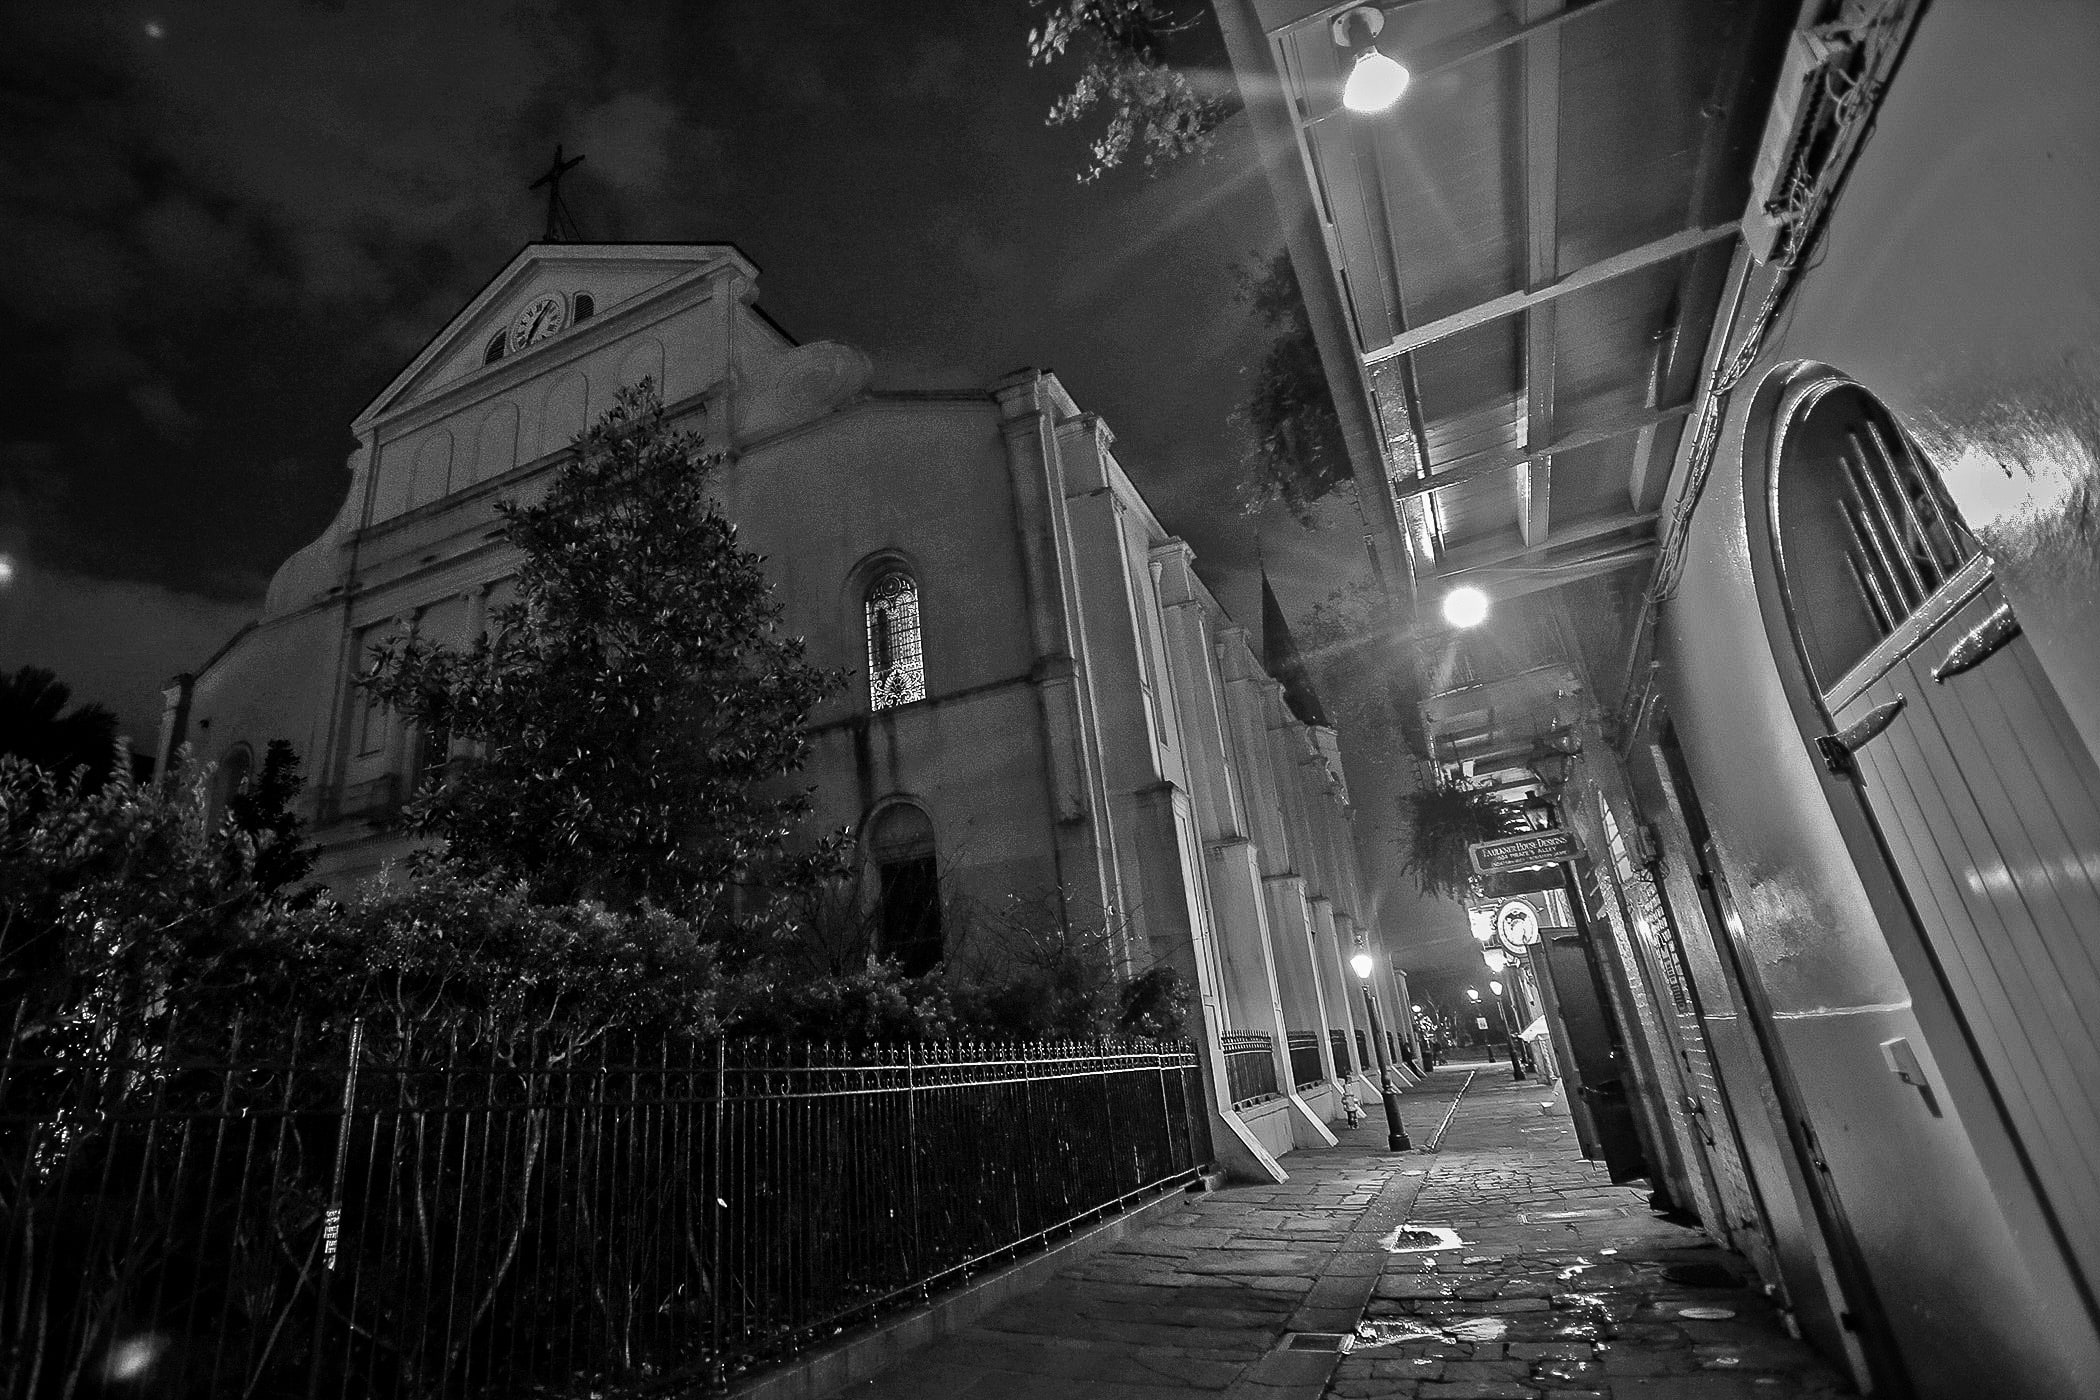 The ghost of Pere Dagobert can be seen walking from the front of St. Louis Cathedral, down Pirate’s Alley which runs along the west side and through the iron-gated St. Anthony’s Garden in the rear of the building.